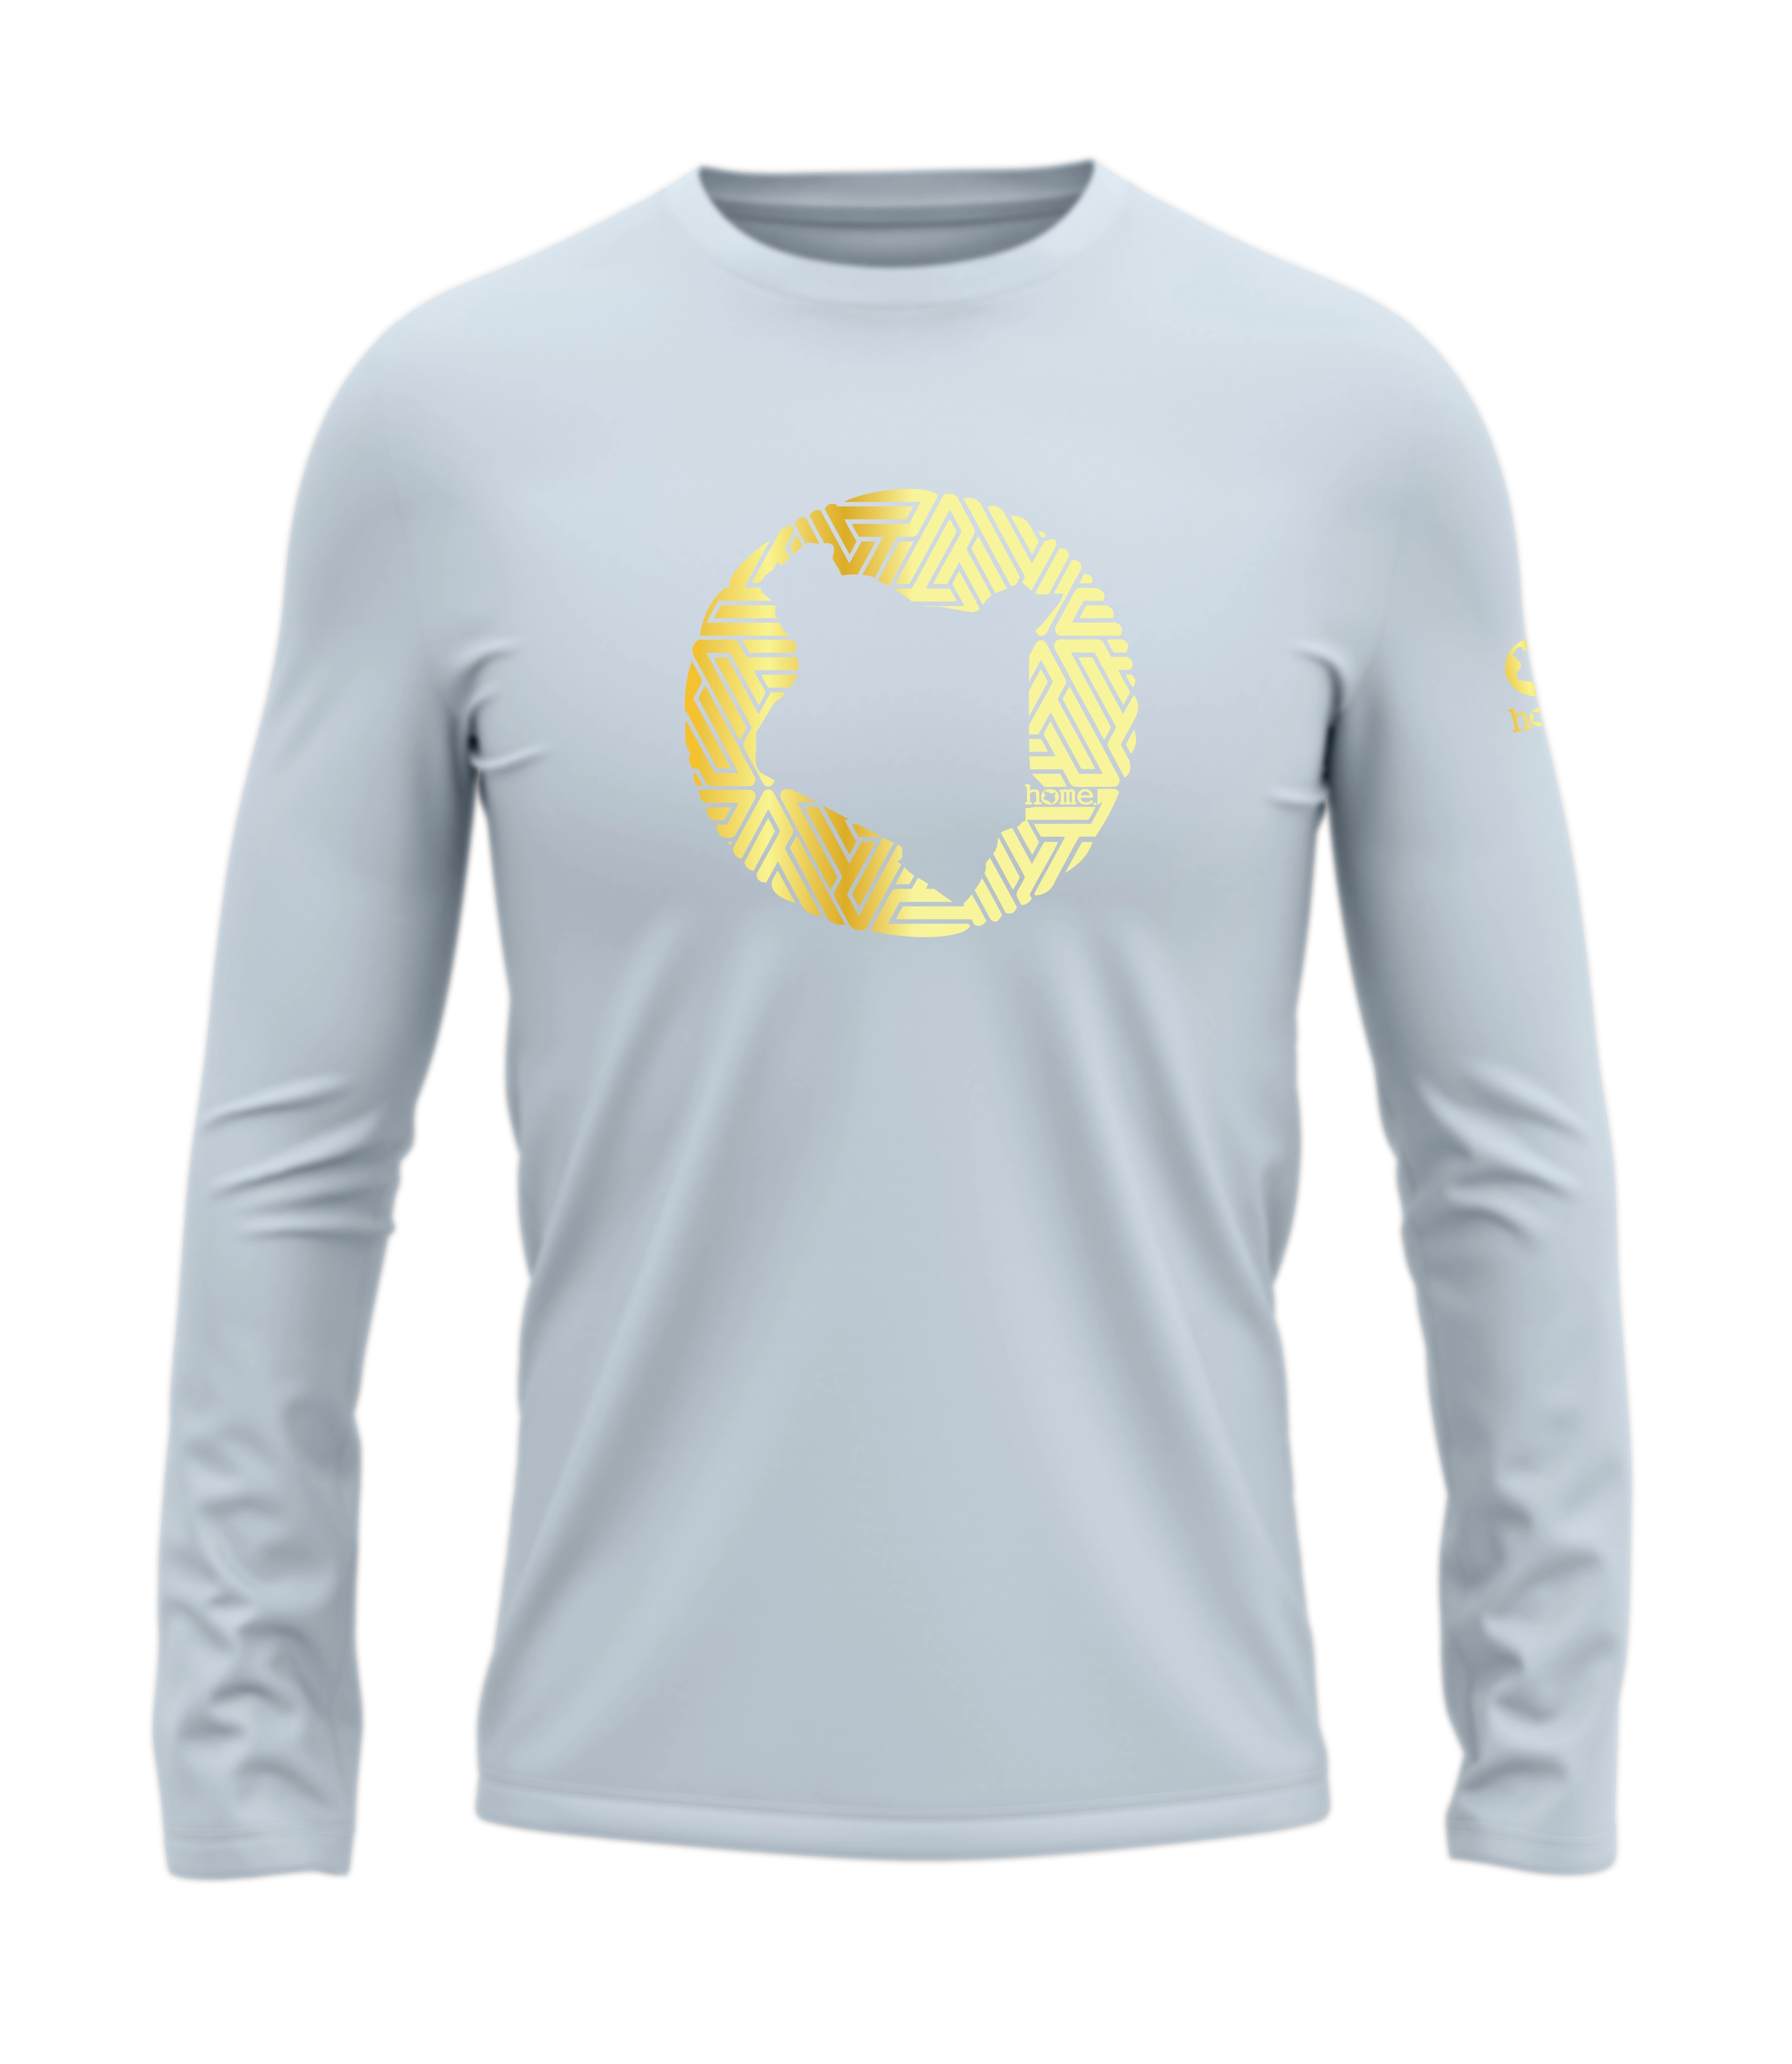 home_254 LONG-SLEEVED SKY-BLUE T-SHIRT WITH A GOLD MAP PRINT – COTTON PLUS FABRIC